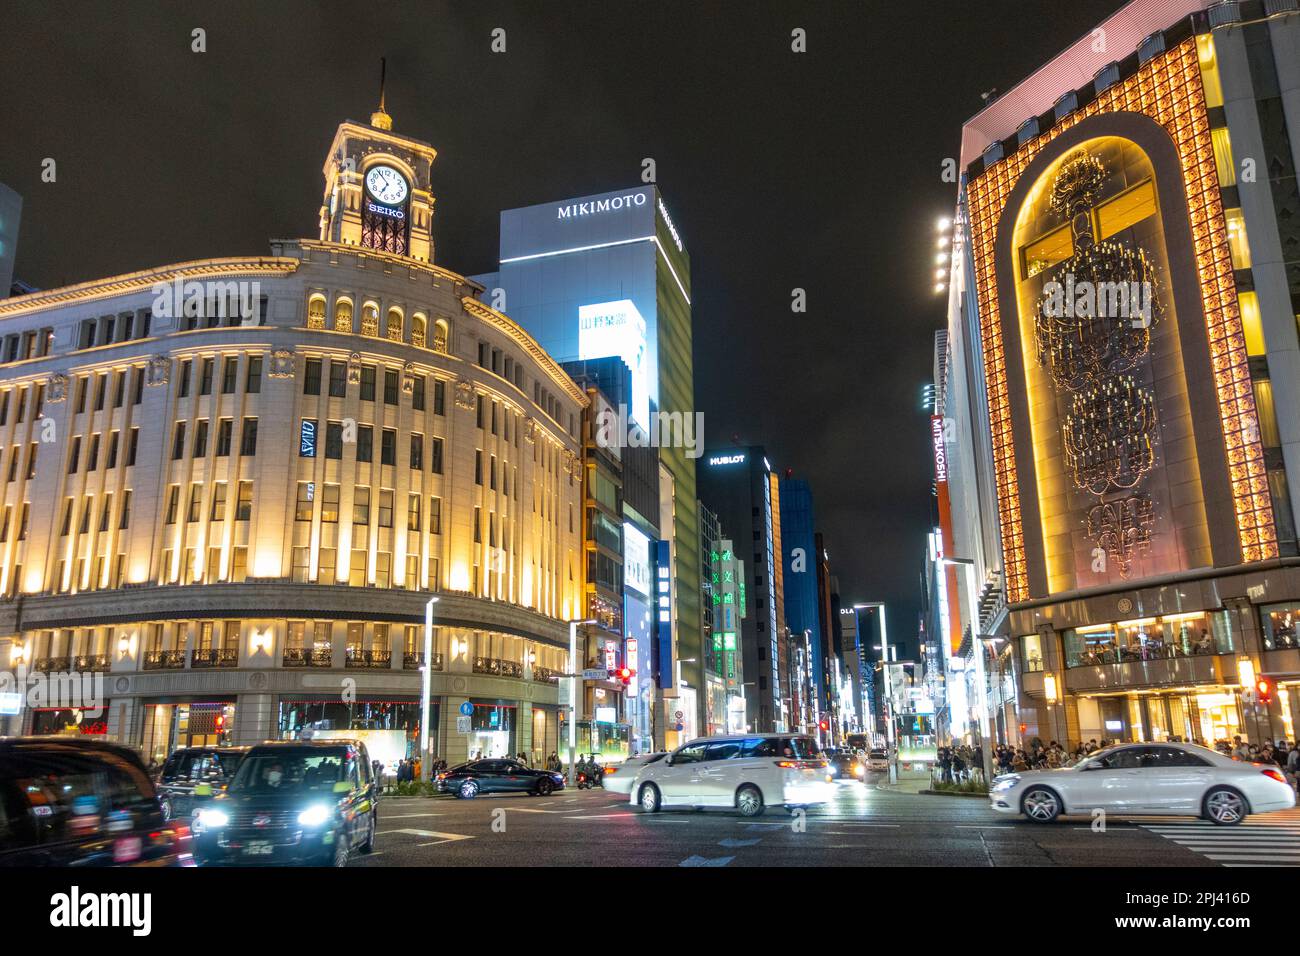 Exterior view at night of Wako and Mitsukoshi department stores in ...